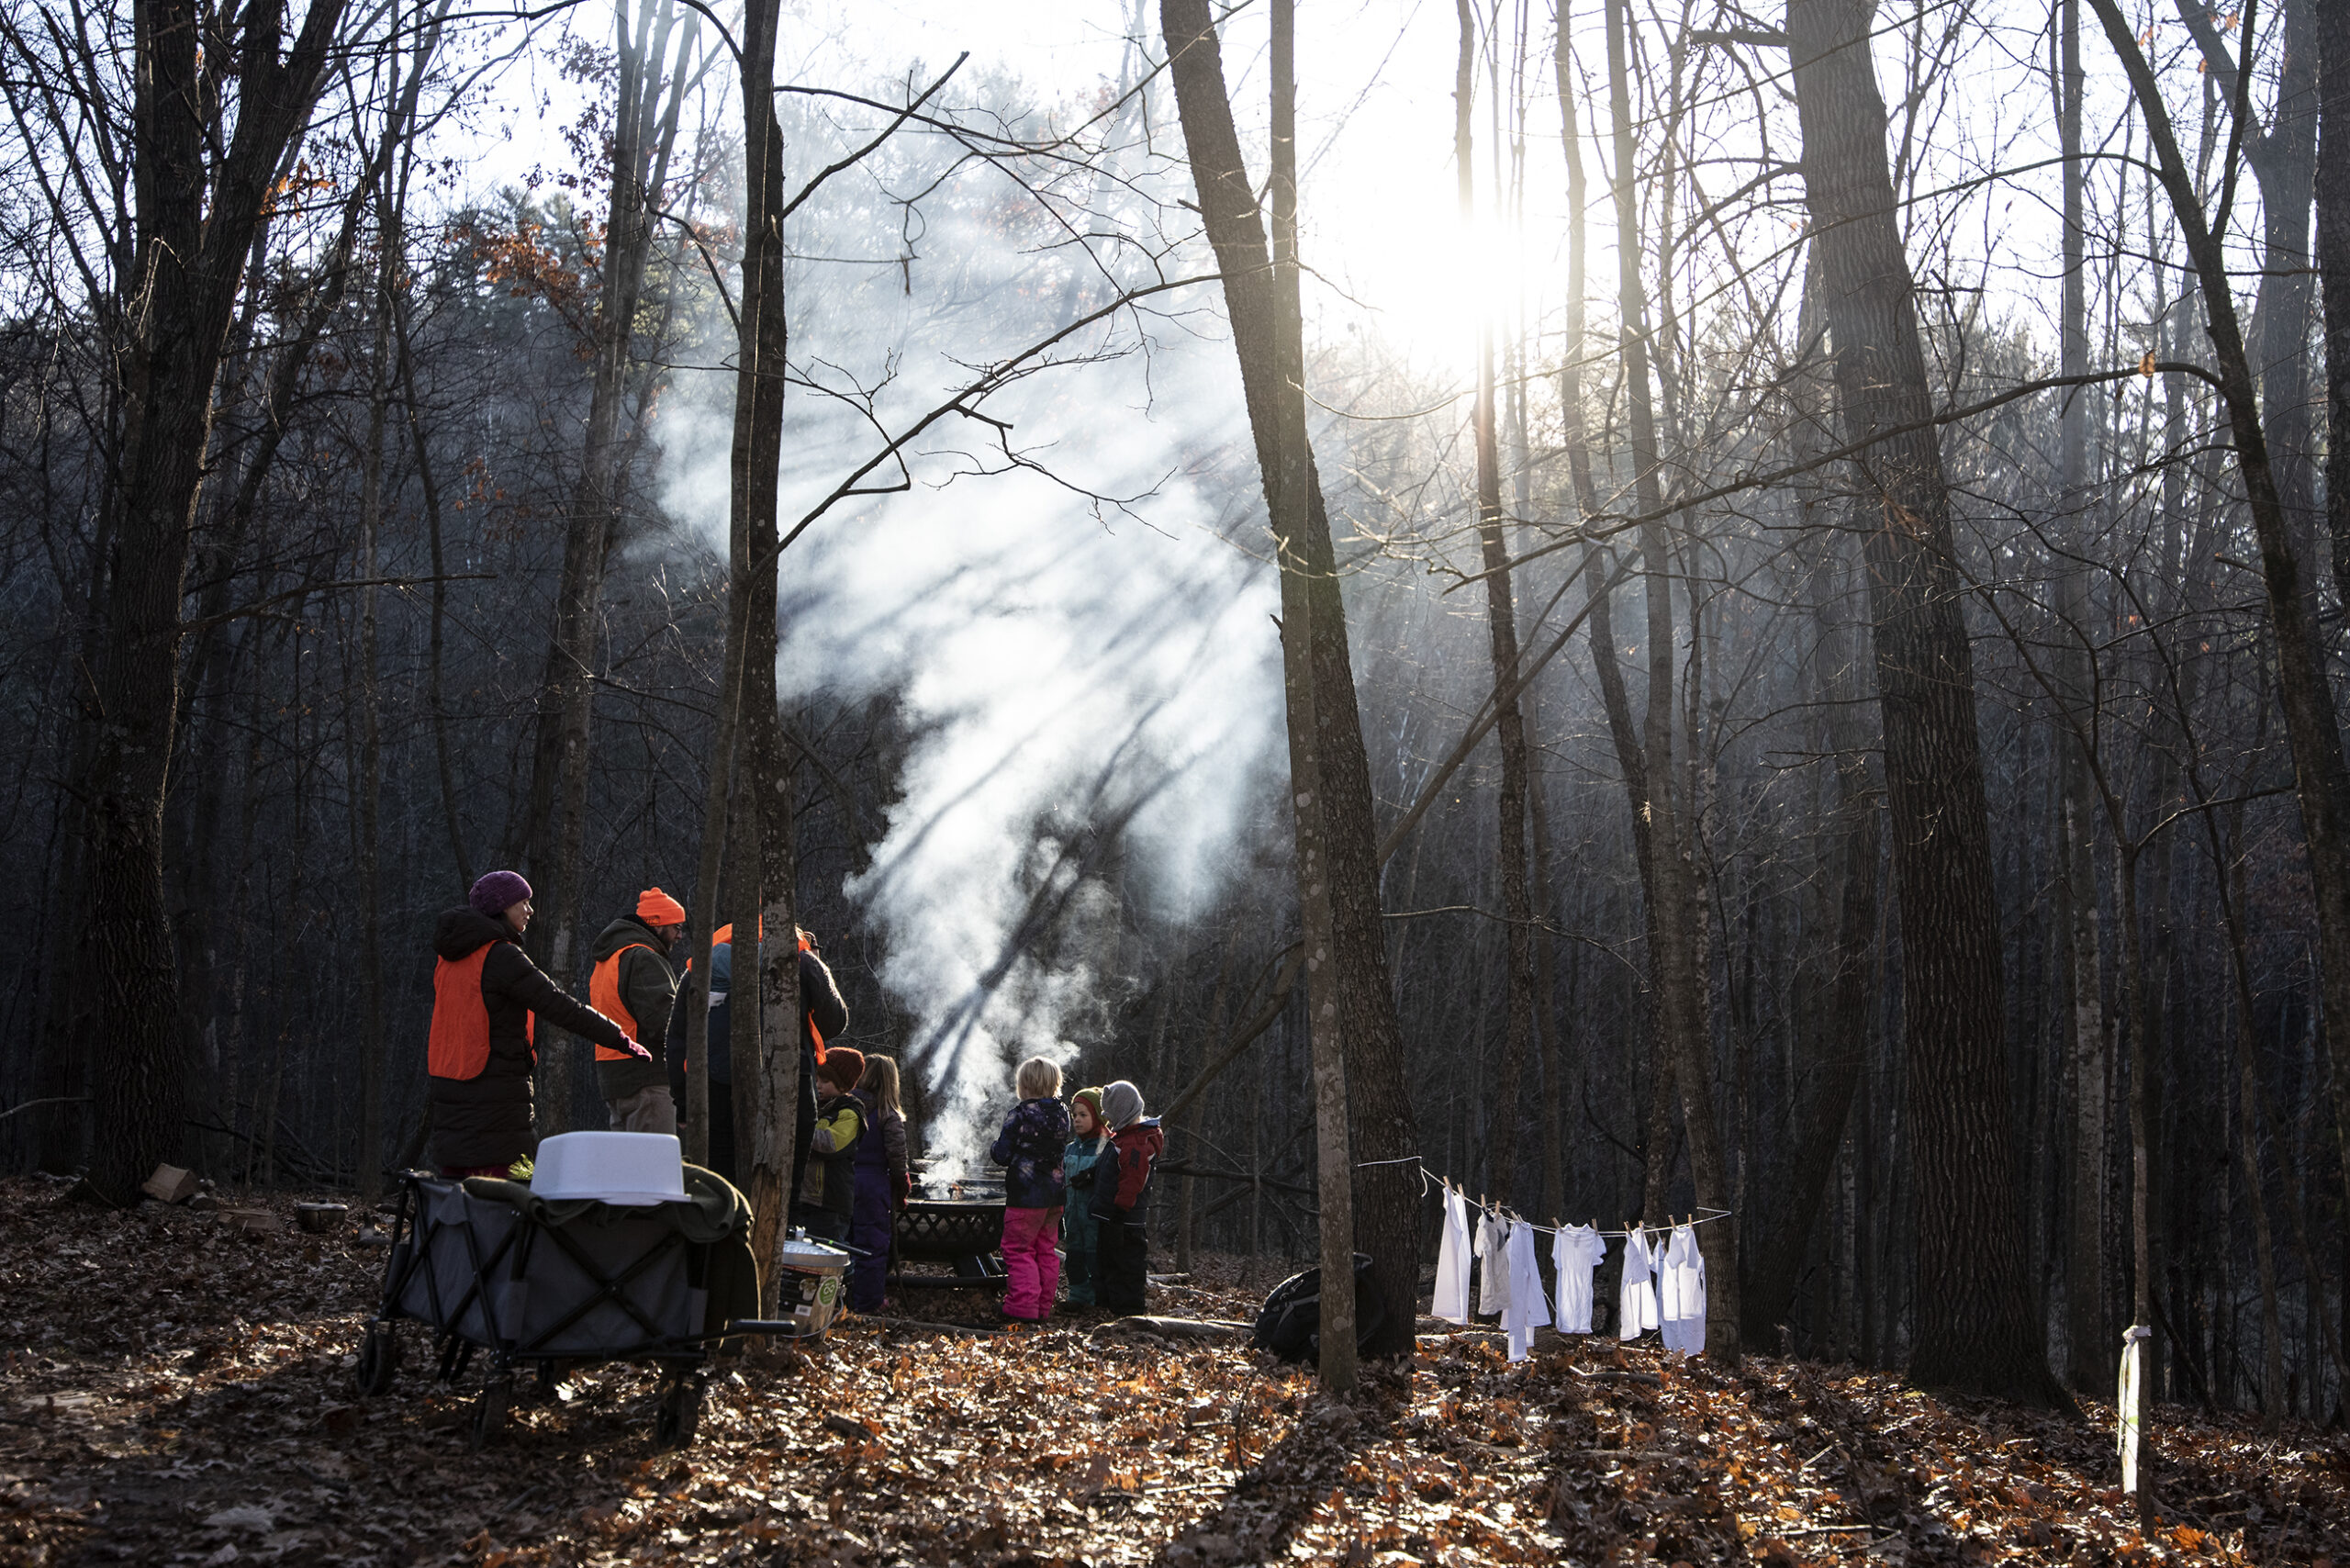 White smoke travels upwards as the sunshine illuminates it through the trees. Small children gather near the fire it is coming from.